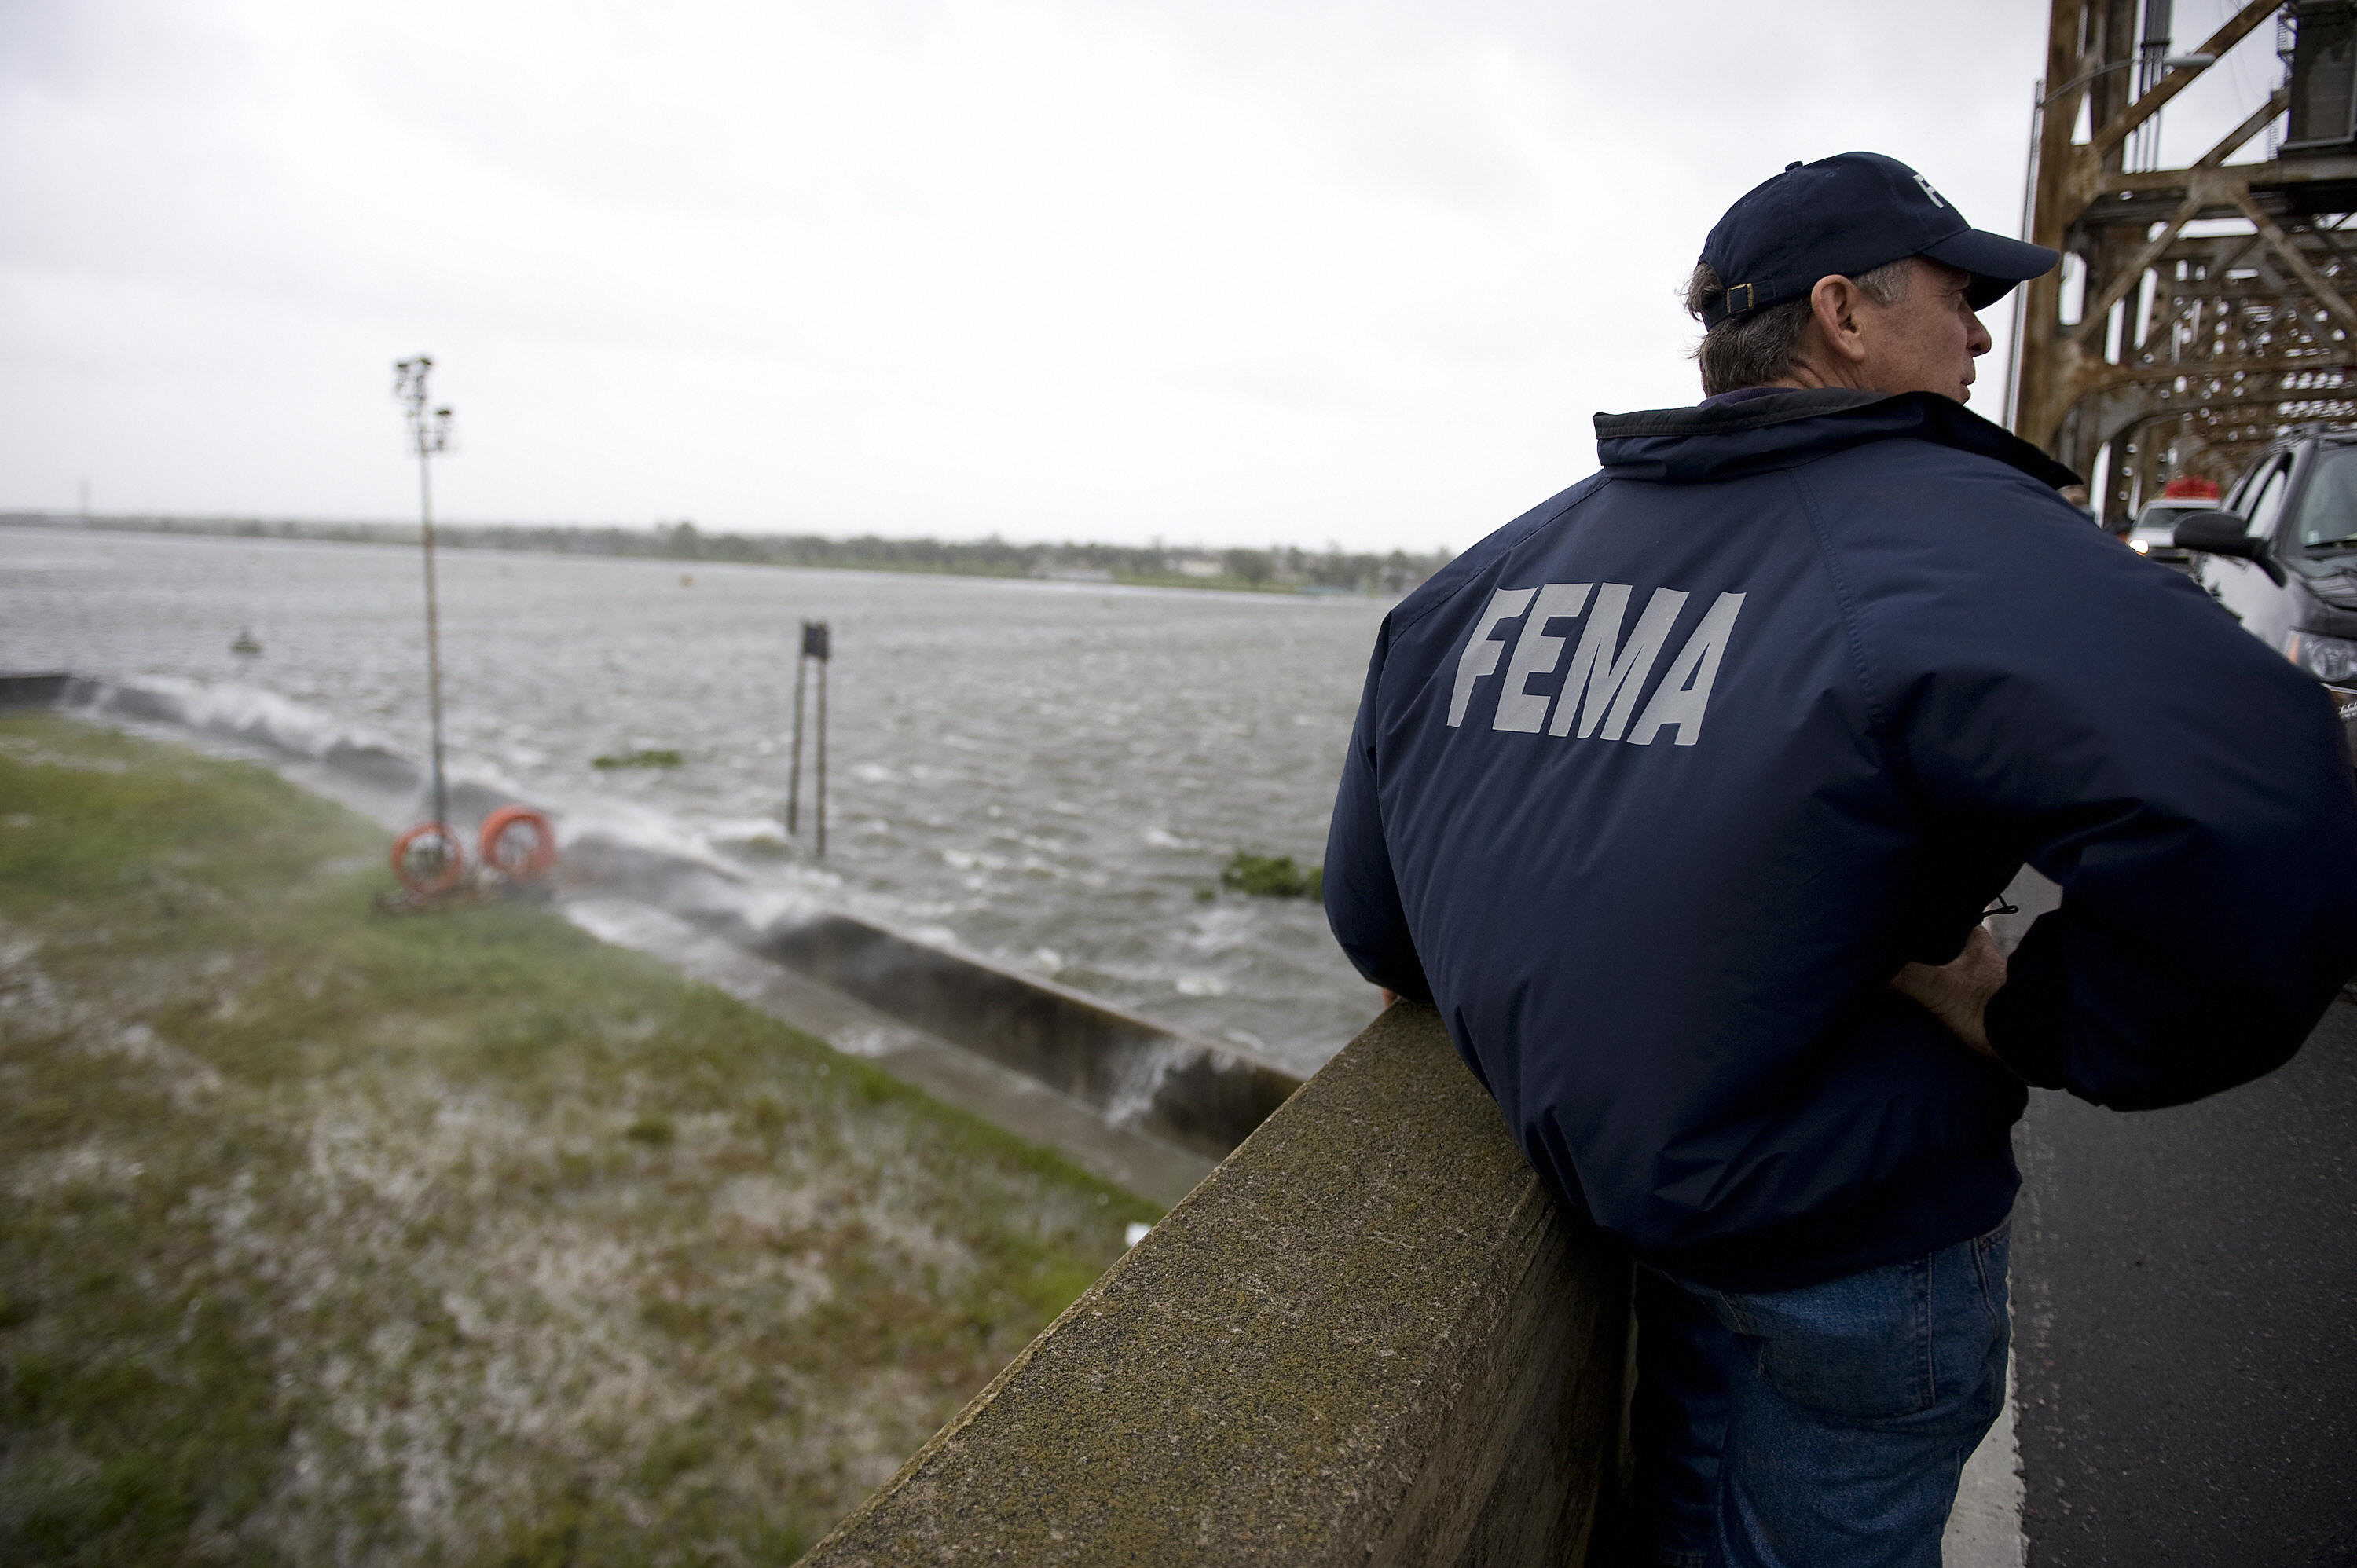 A FEMA representative stands on a bridge in New Orleans surveying the area.